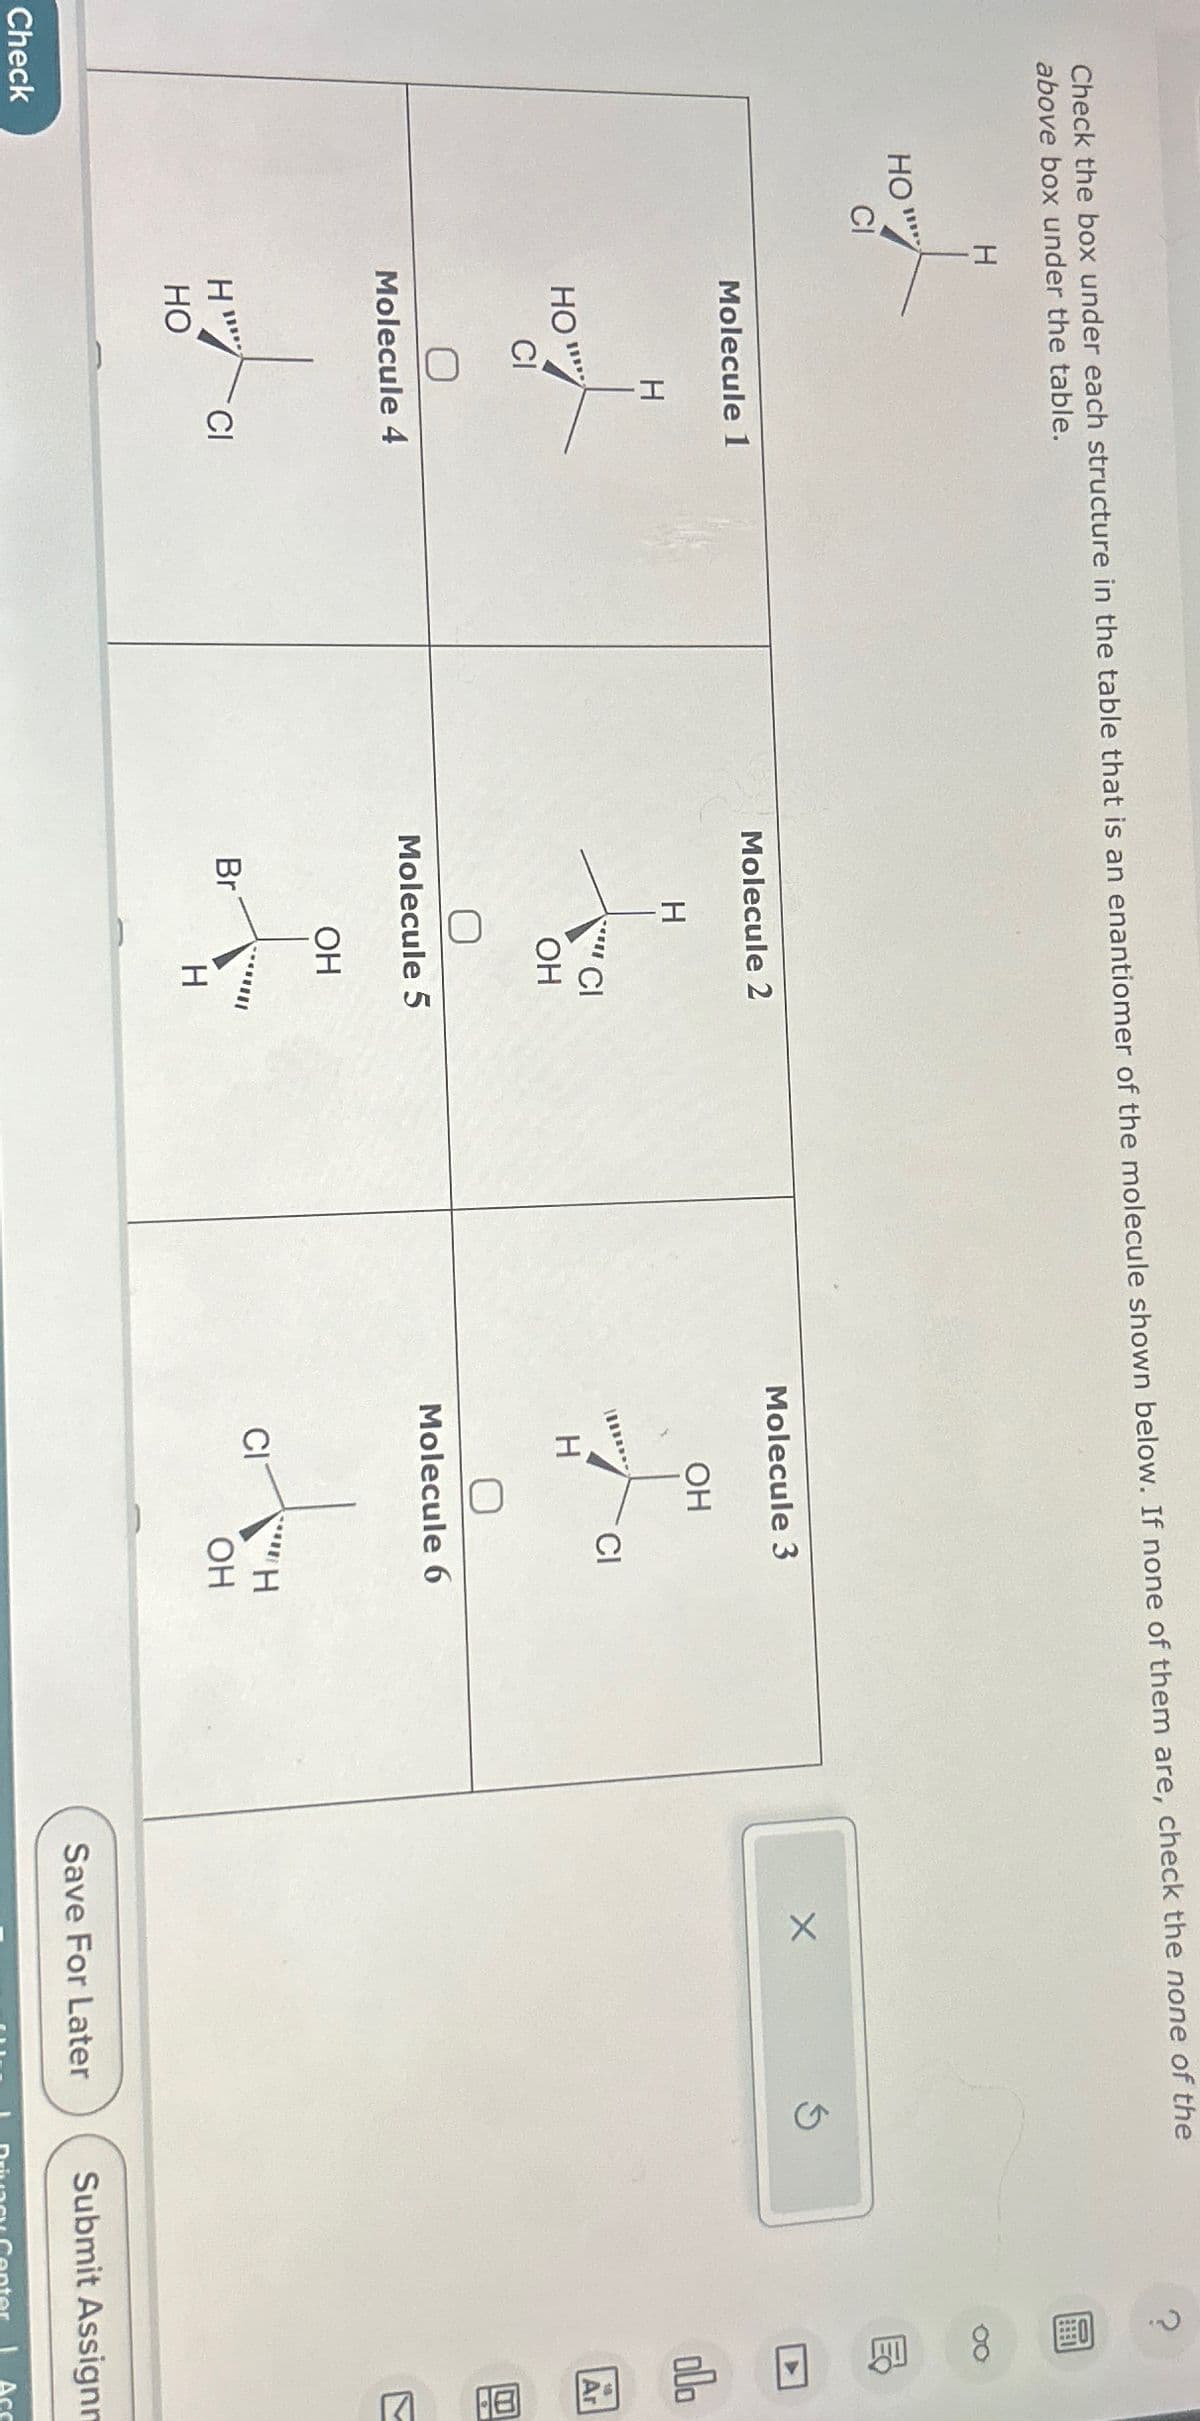 Check the box under each structure in the table that is an enantiomer of the molecule shown below. If none of them are, check the none of the
above box under the table.
H
Check
HO"
CI
Molecule 1
НО'
CI
H
Molecule 4
Ha
CI
HO
Molecule 2
H
f
'Cl
Br
OH
Molecule 5
OH
H
Molecule 3
H
OH
CI
0
Molecule 6
CIT
***H
OH
X
Save For Later
Ś
0
8
A
000
18
Ar
7
Submit Assignm